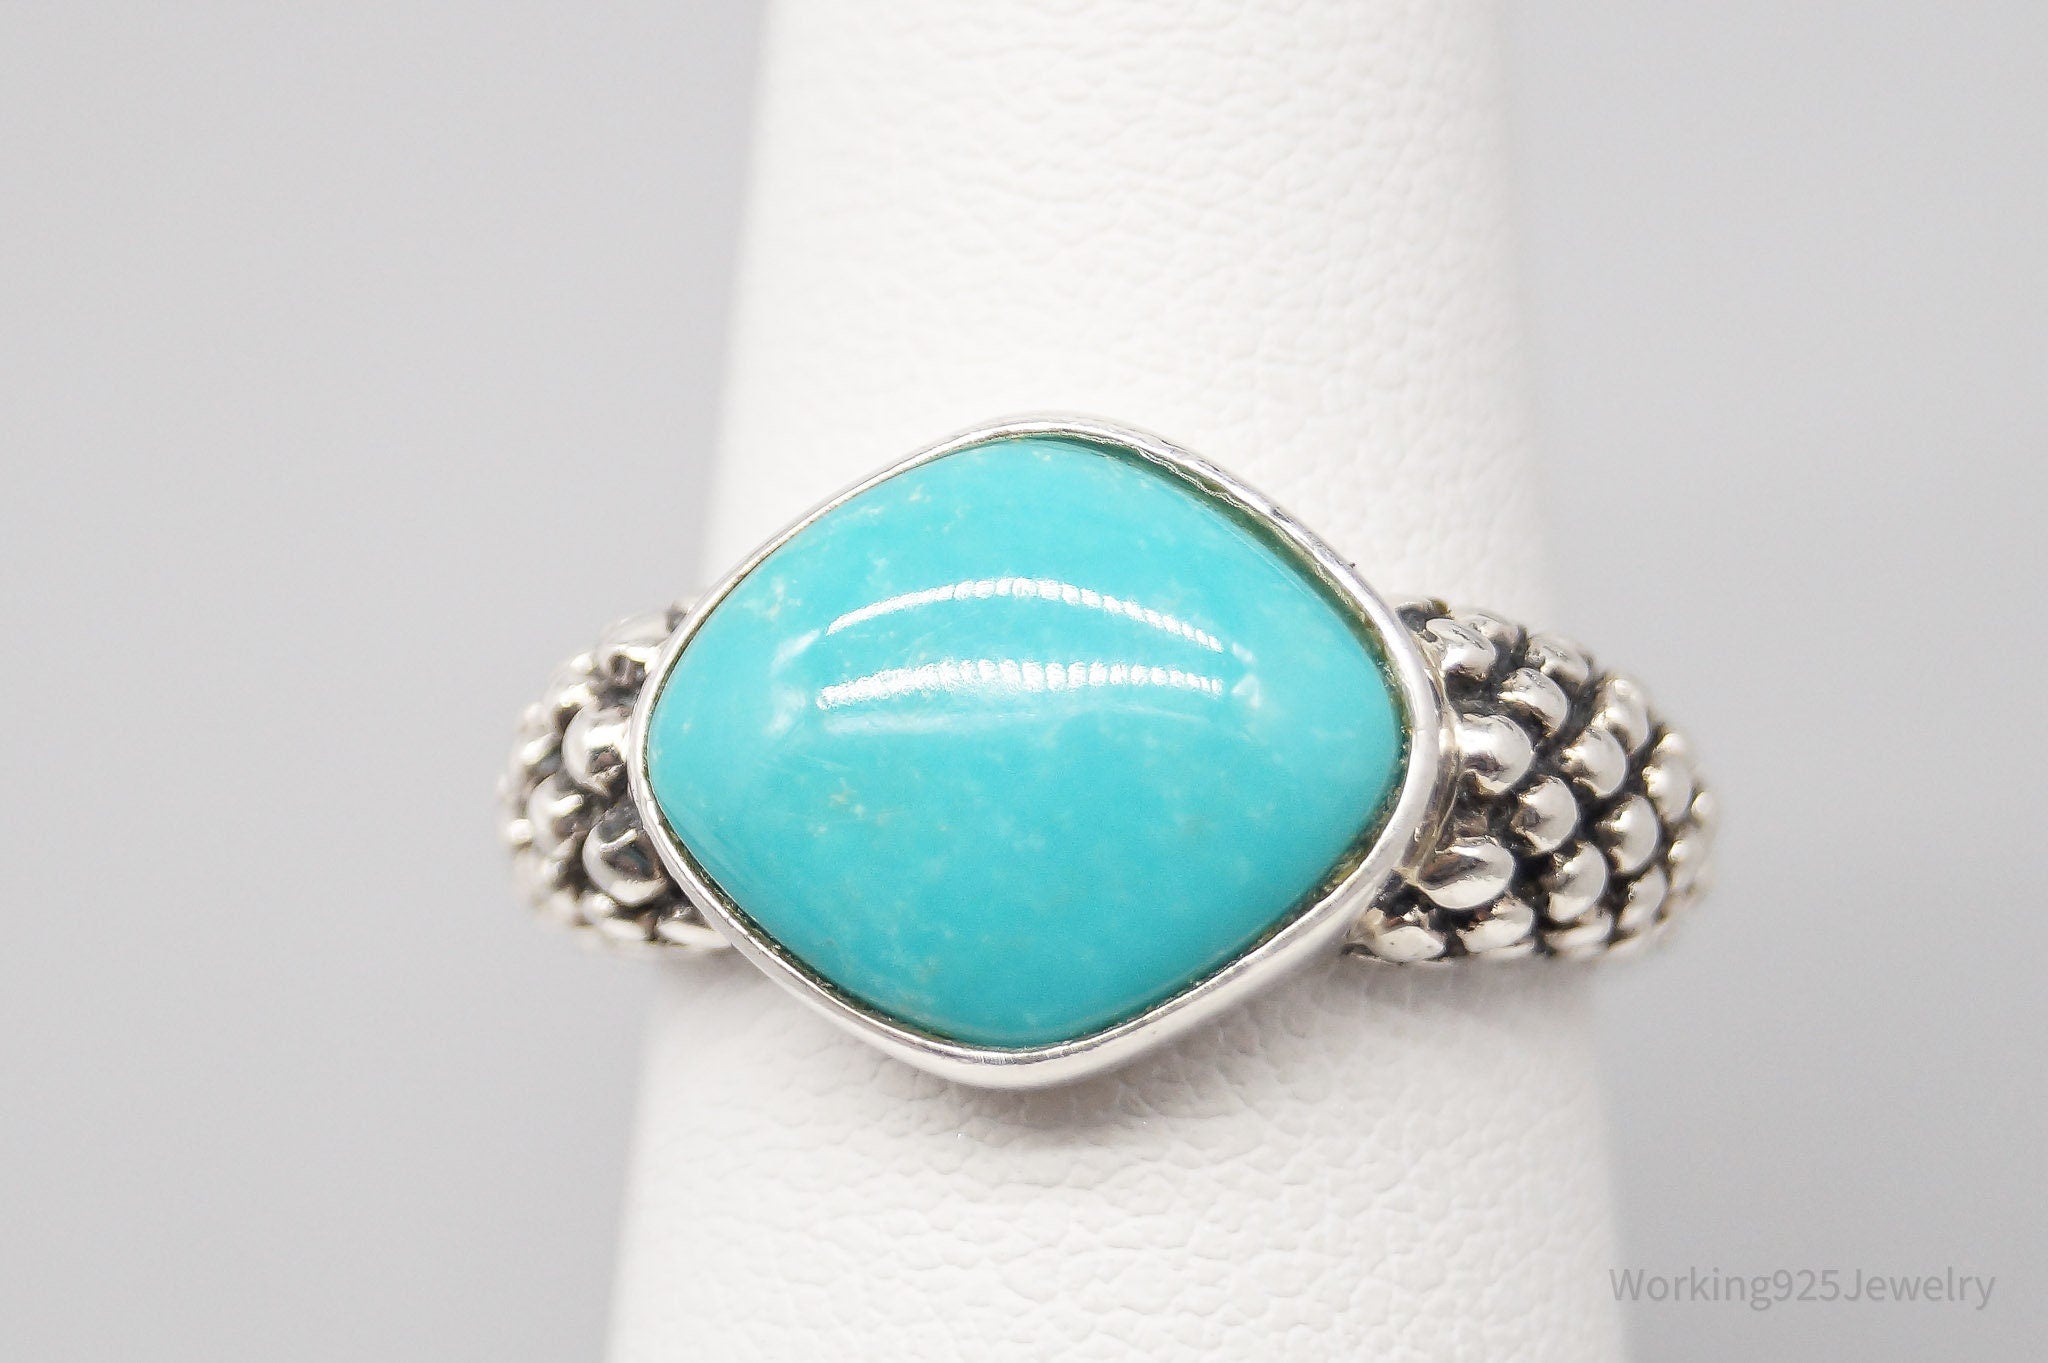 Vintage Turquoise Sterling Silver Ring - Size 6